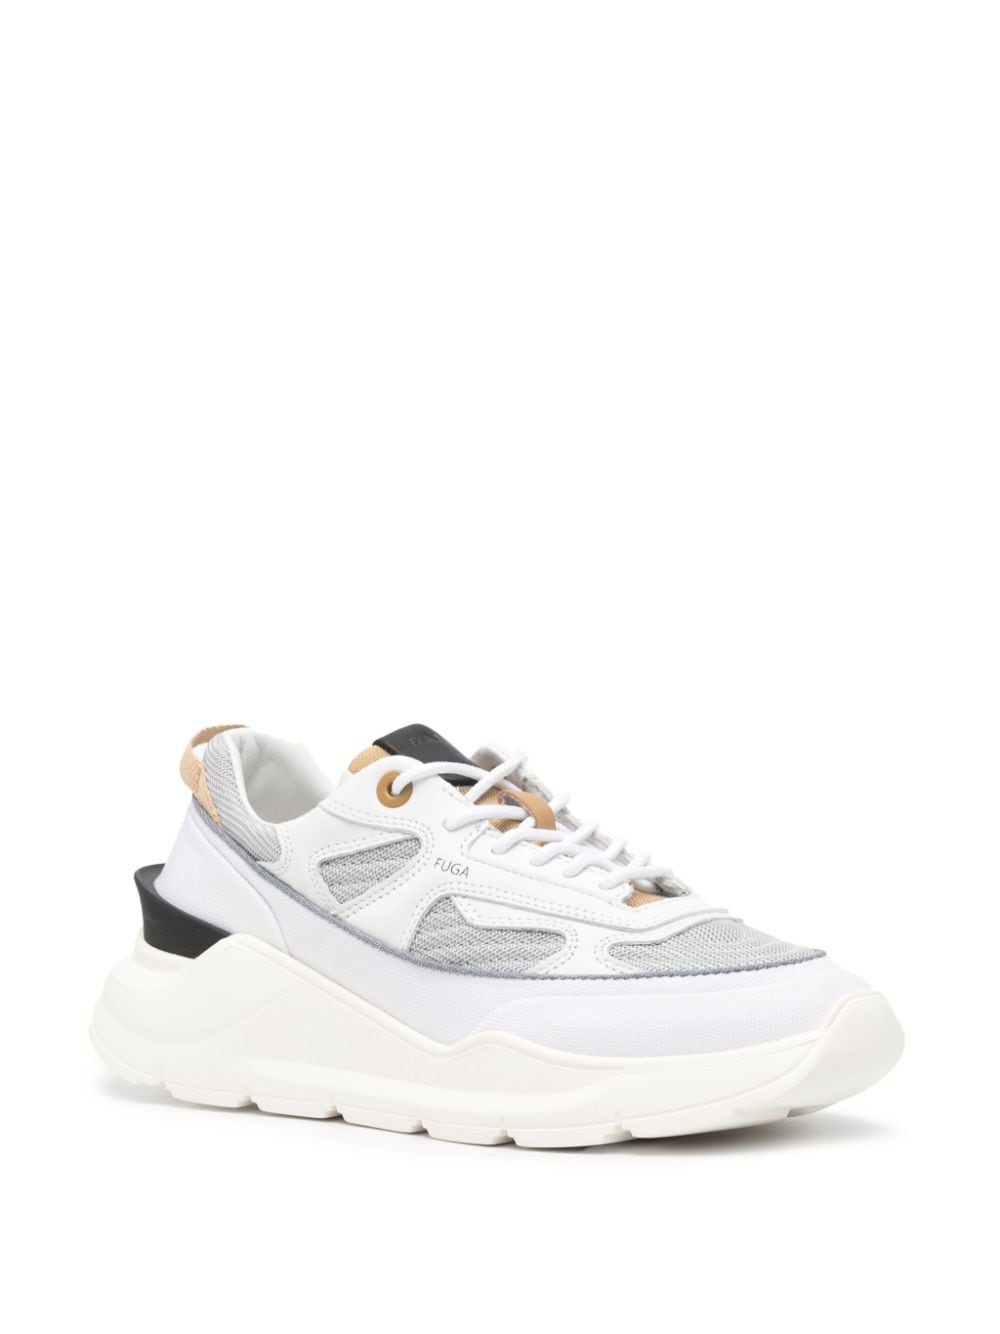 Shop Date Fuga Chunky Sneakers In Neutrals